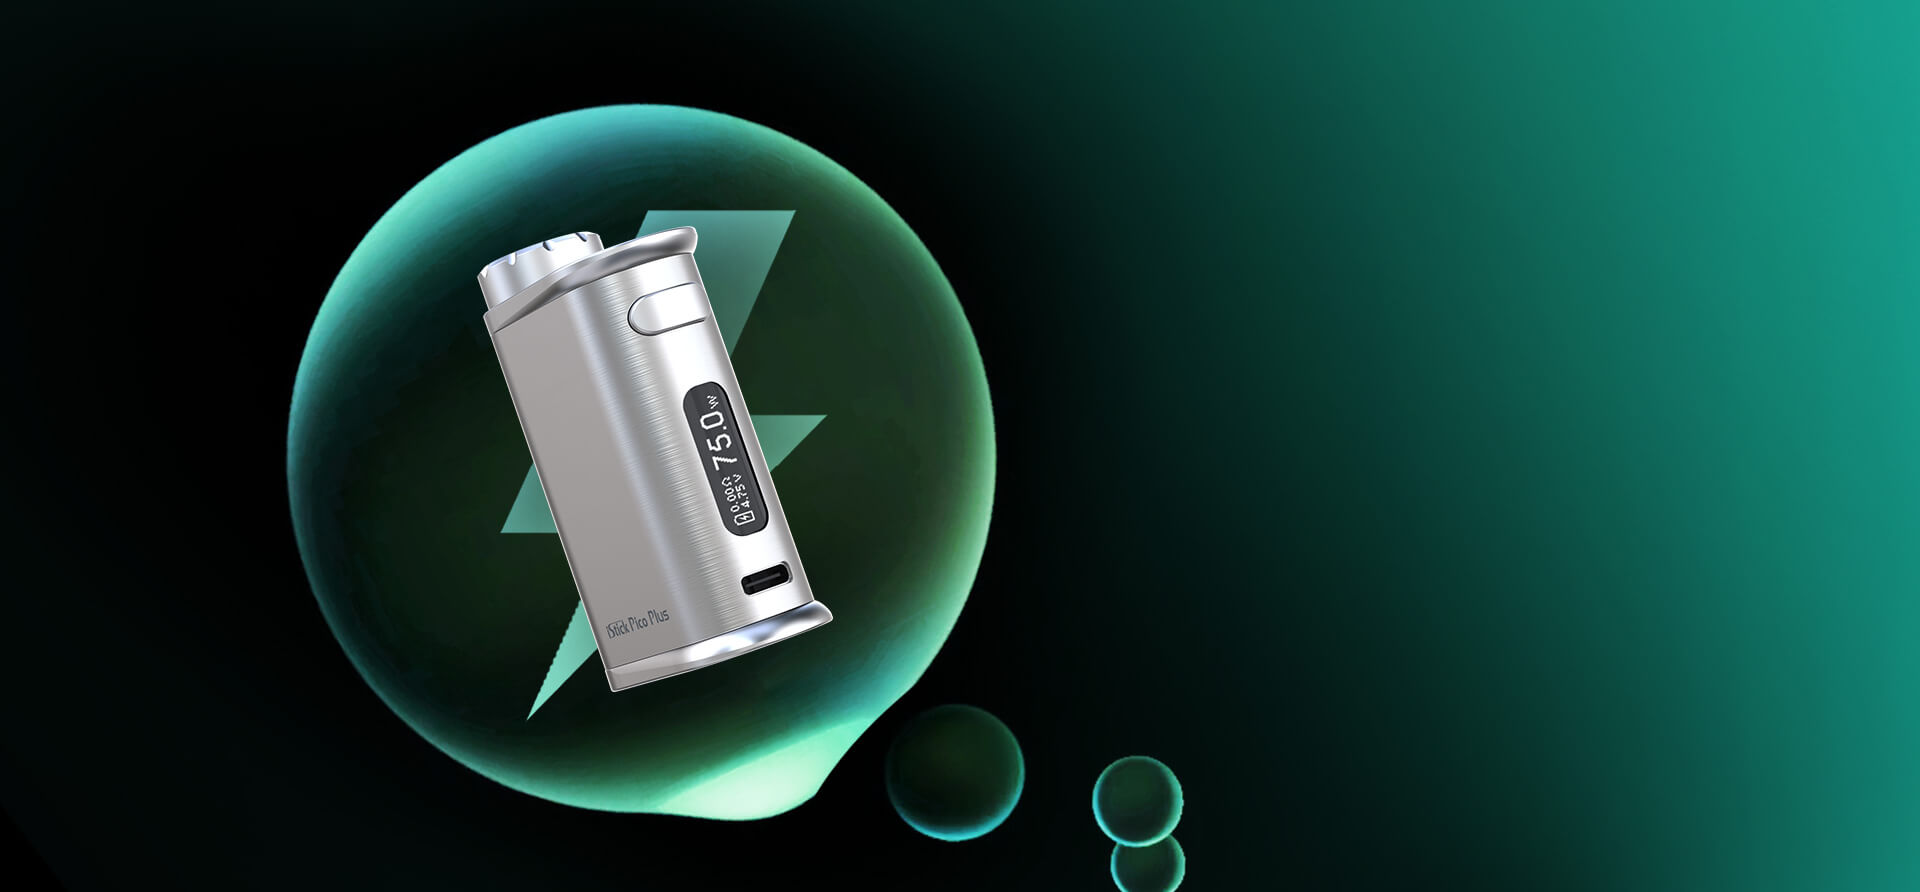 With USB-C fast charging, iStick Pico Plus can secure your perfect vaping for long time